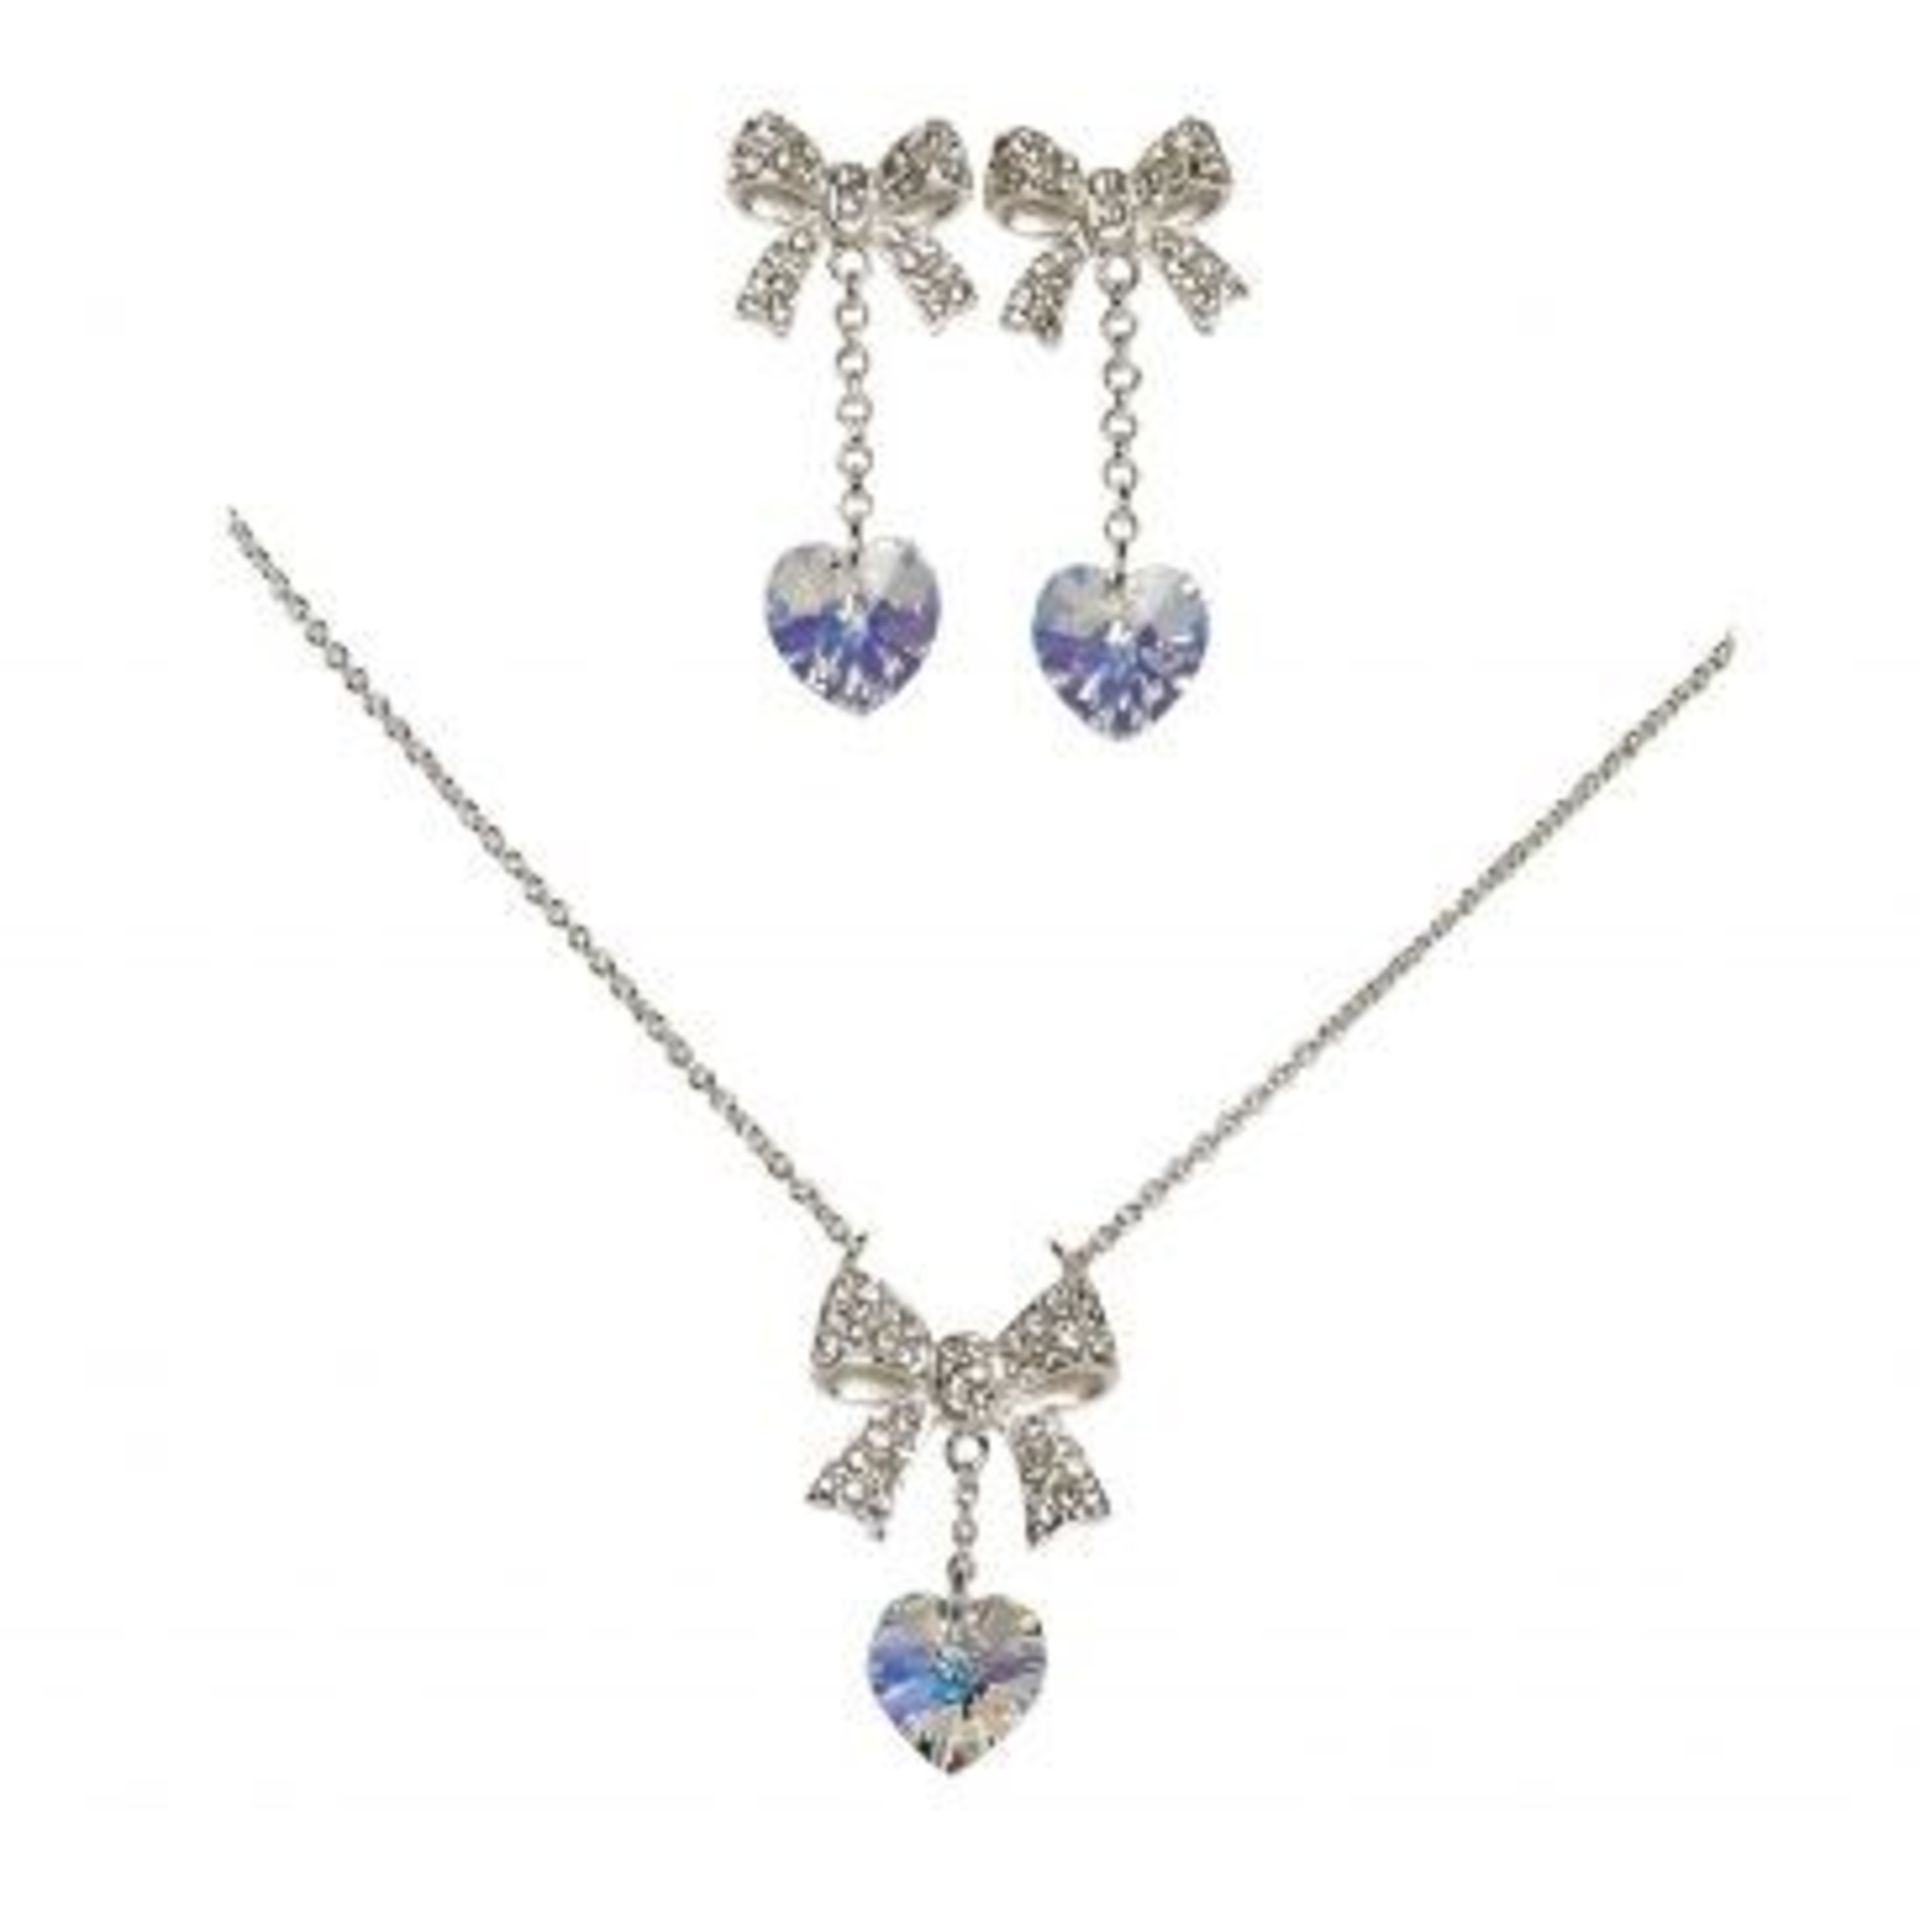 50 x HEART PENDANT AND EARRING SETS By ICE London - EGJ-9900 - Silver-tone Curb Chain Adorned With - Image 2 of 2